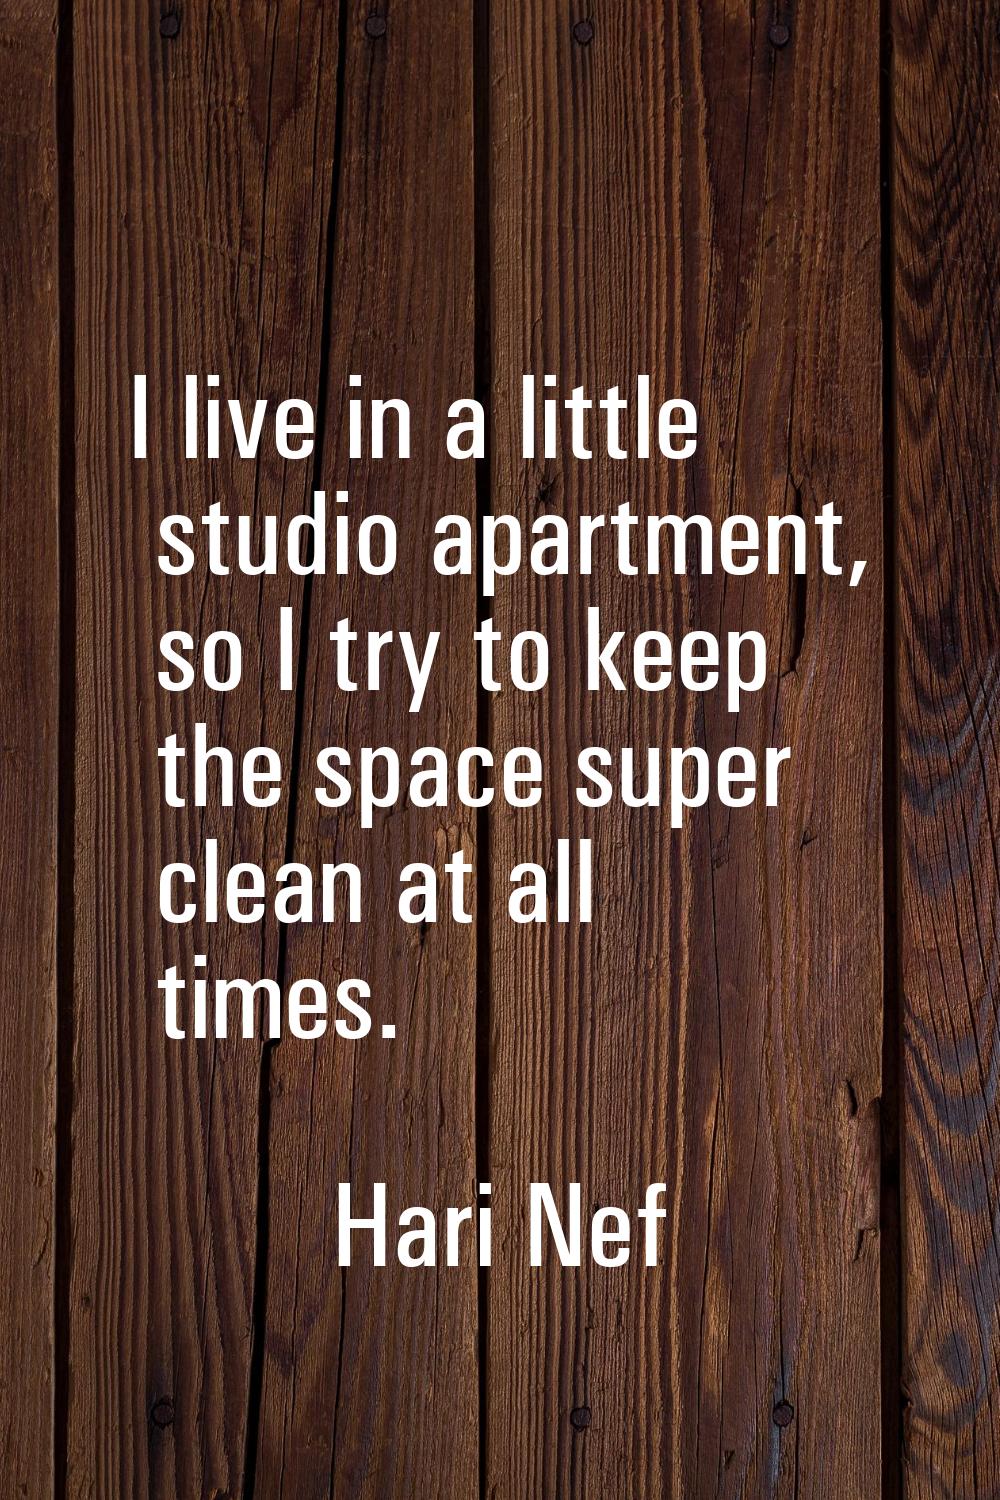 I live in a little studio apartment, so I try to keep the space super clean at all times.